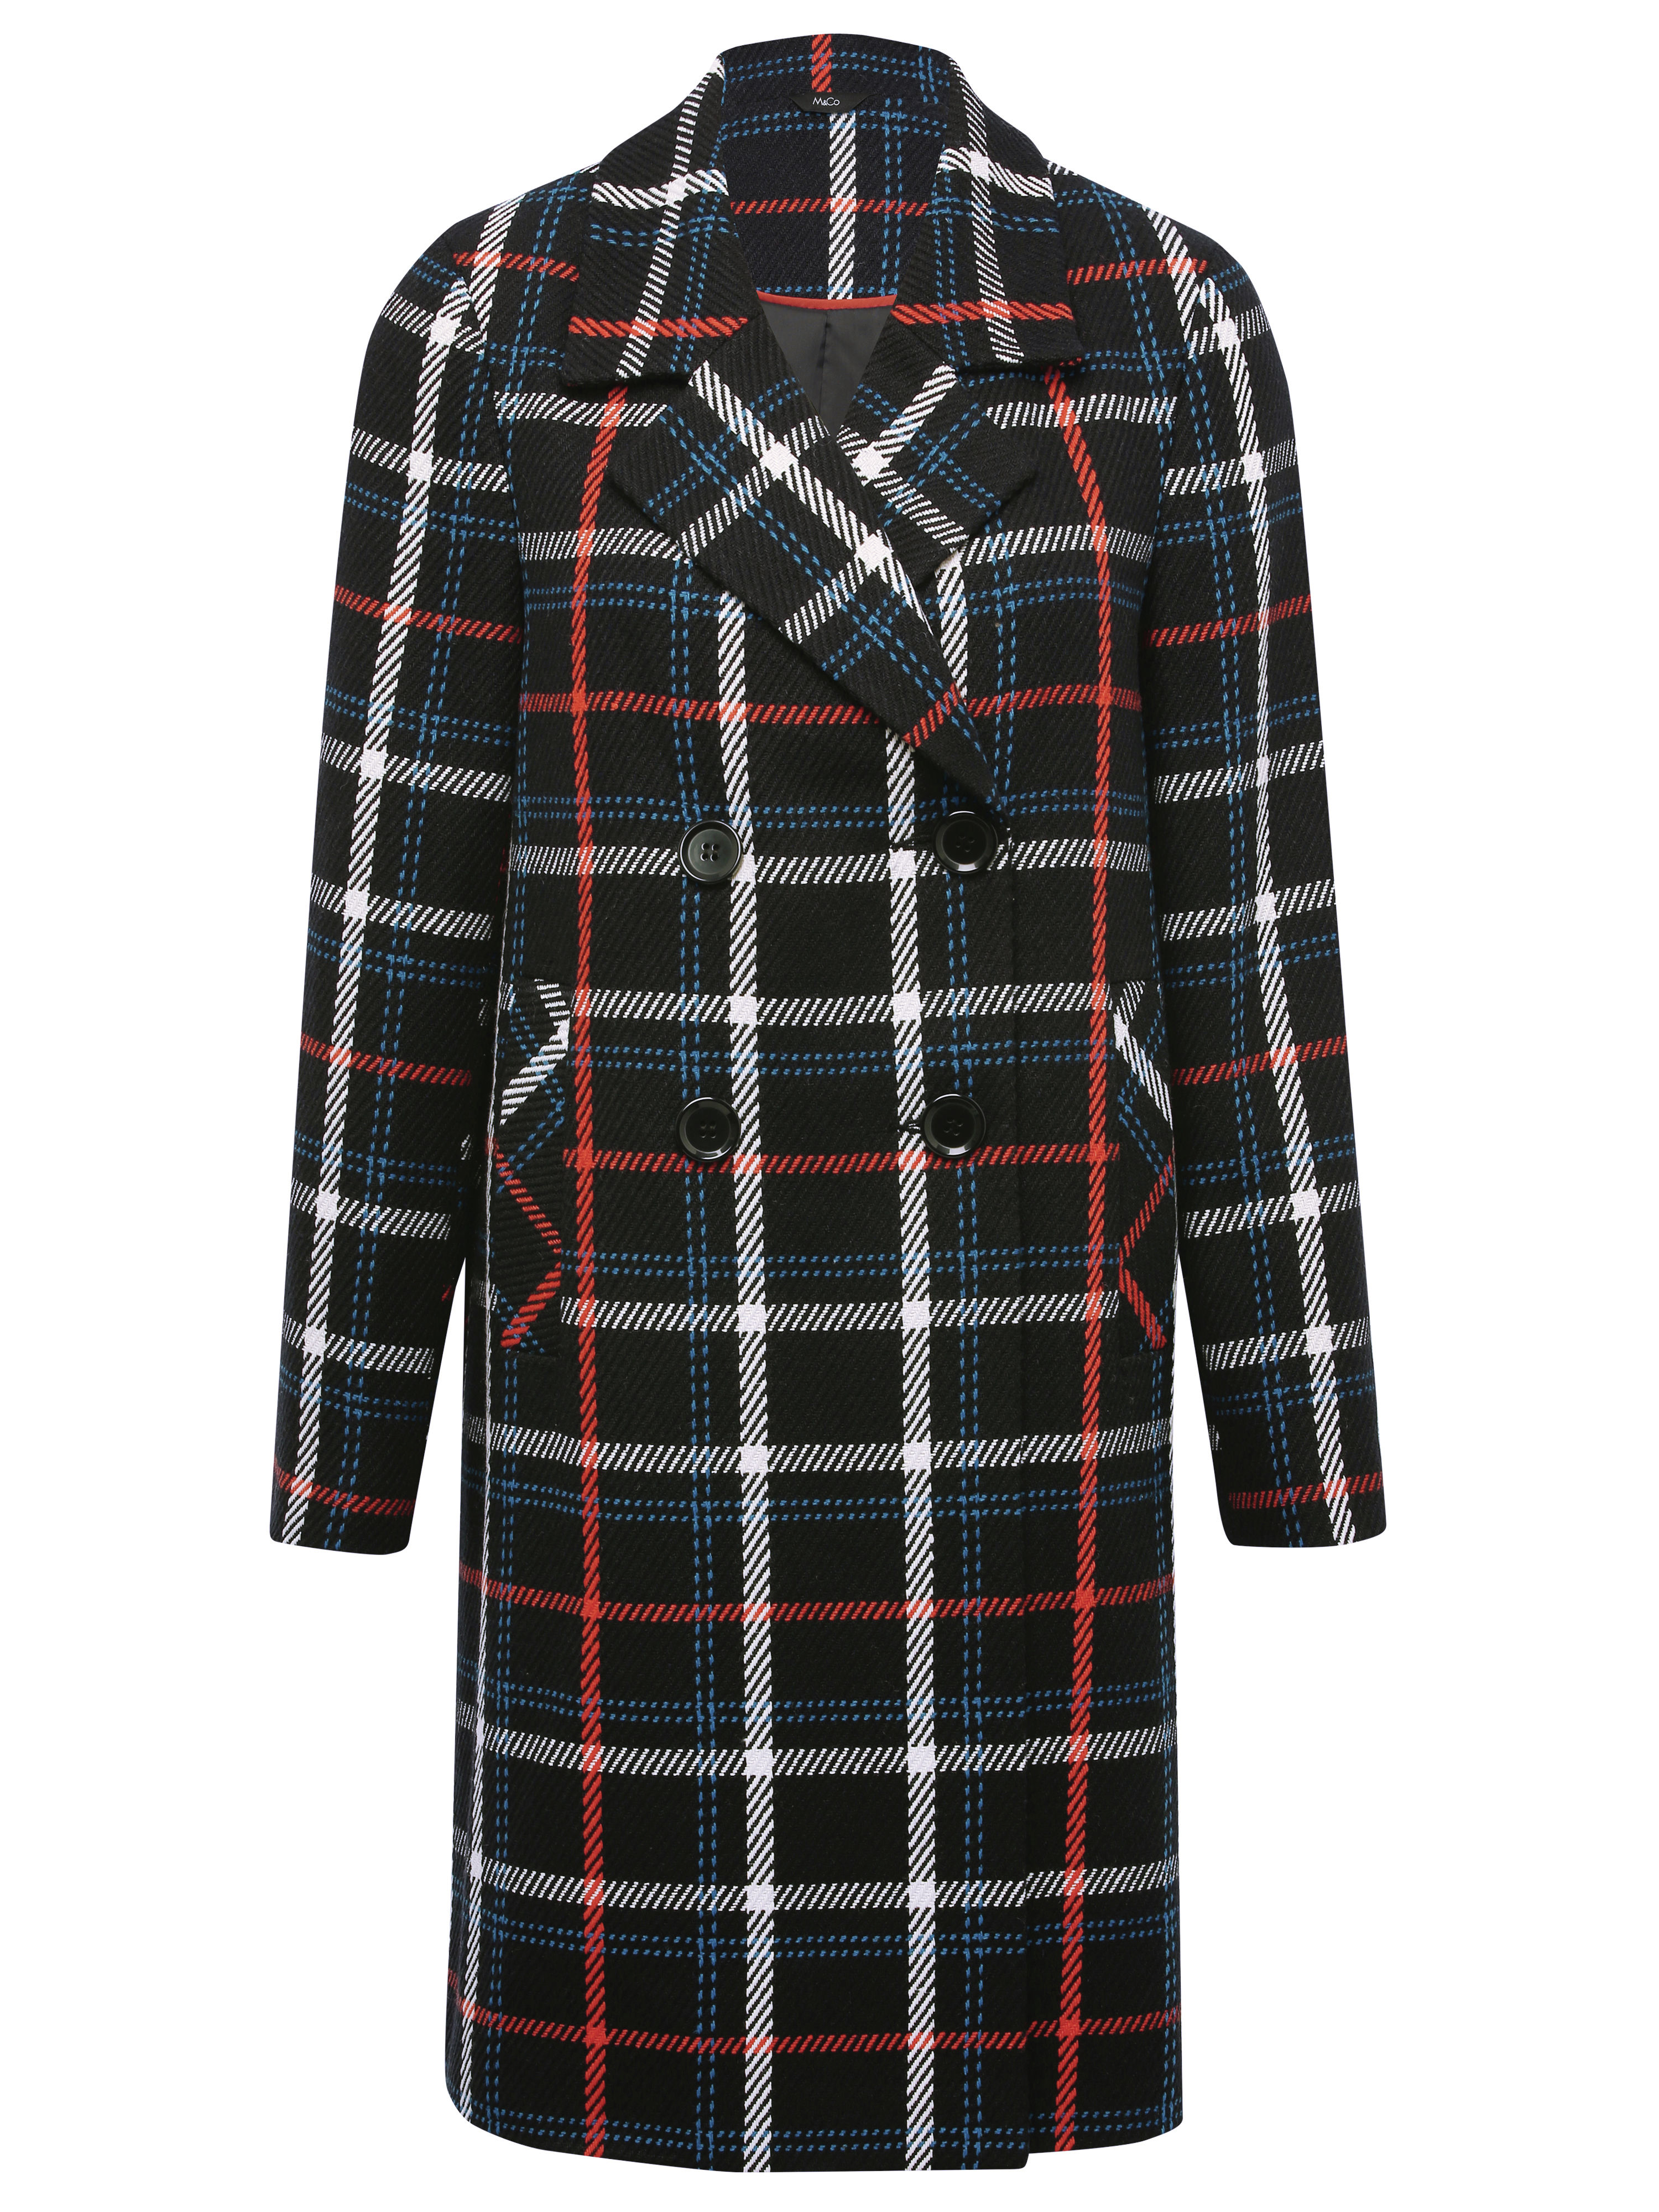 Blue, red and white check coat £75